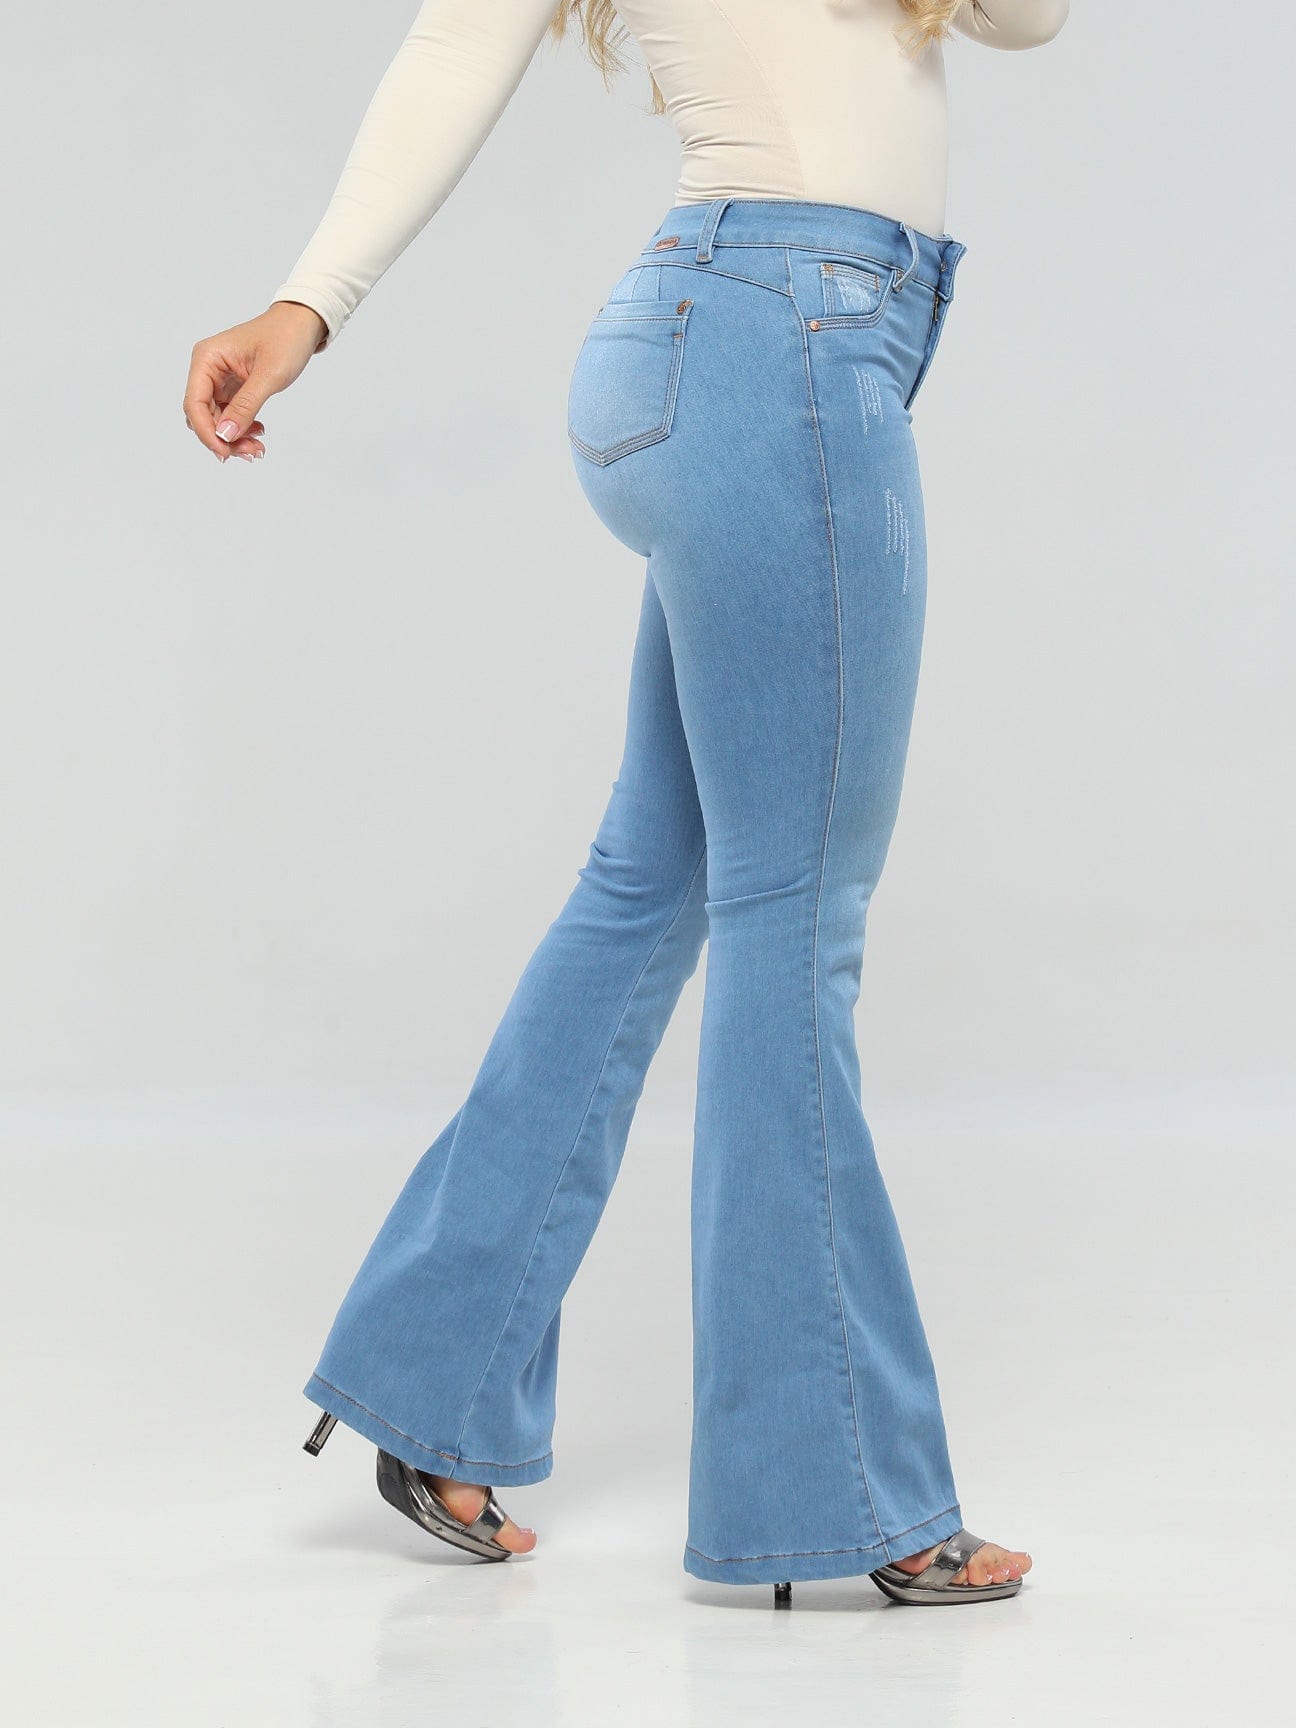 Draxy Colombia Mid Rise Wide Waistband Jean Push Up Butt Lift Jean